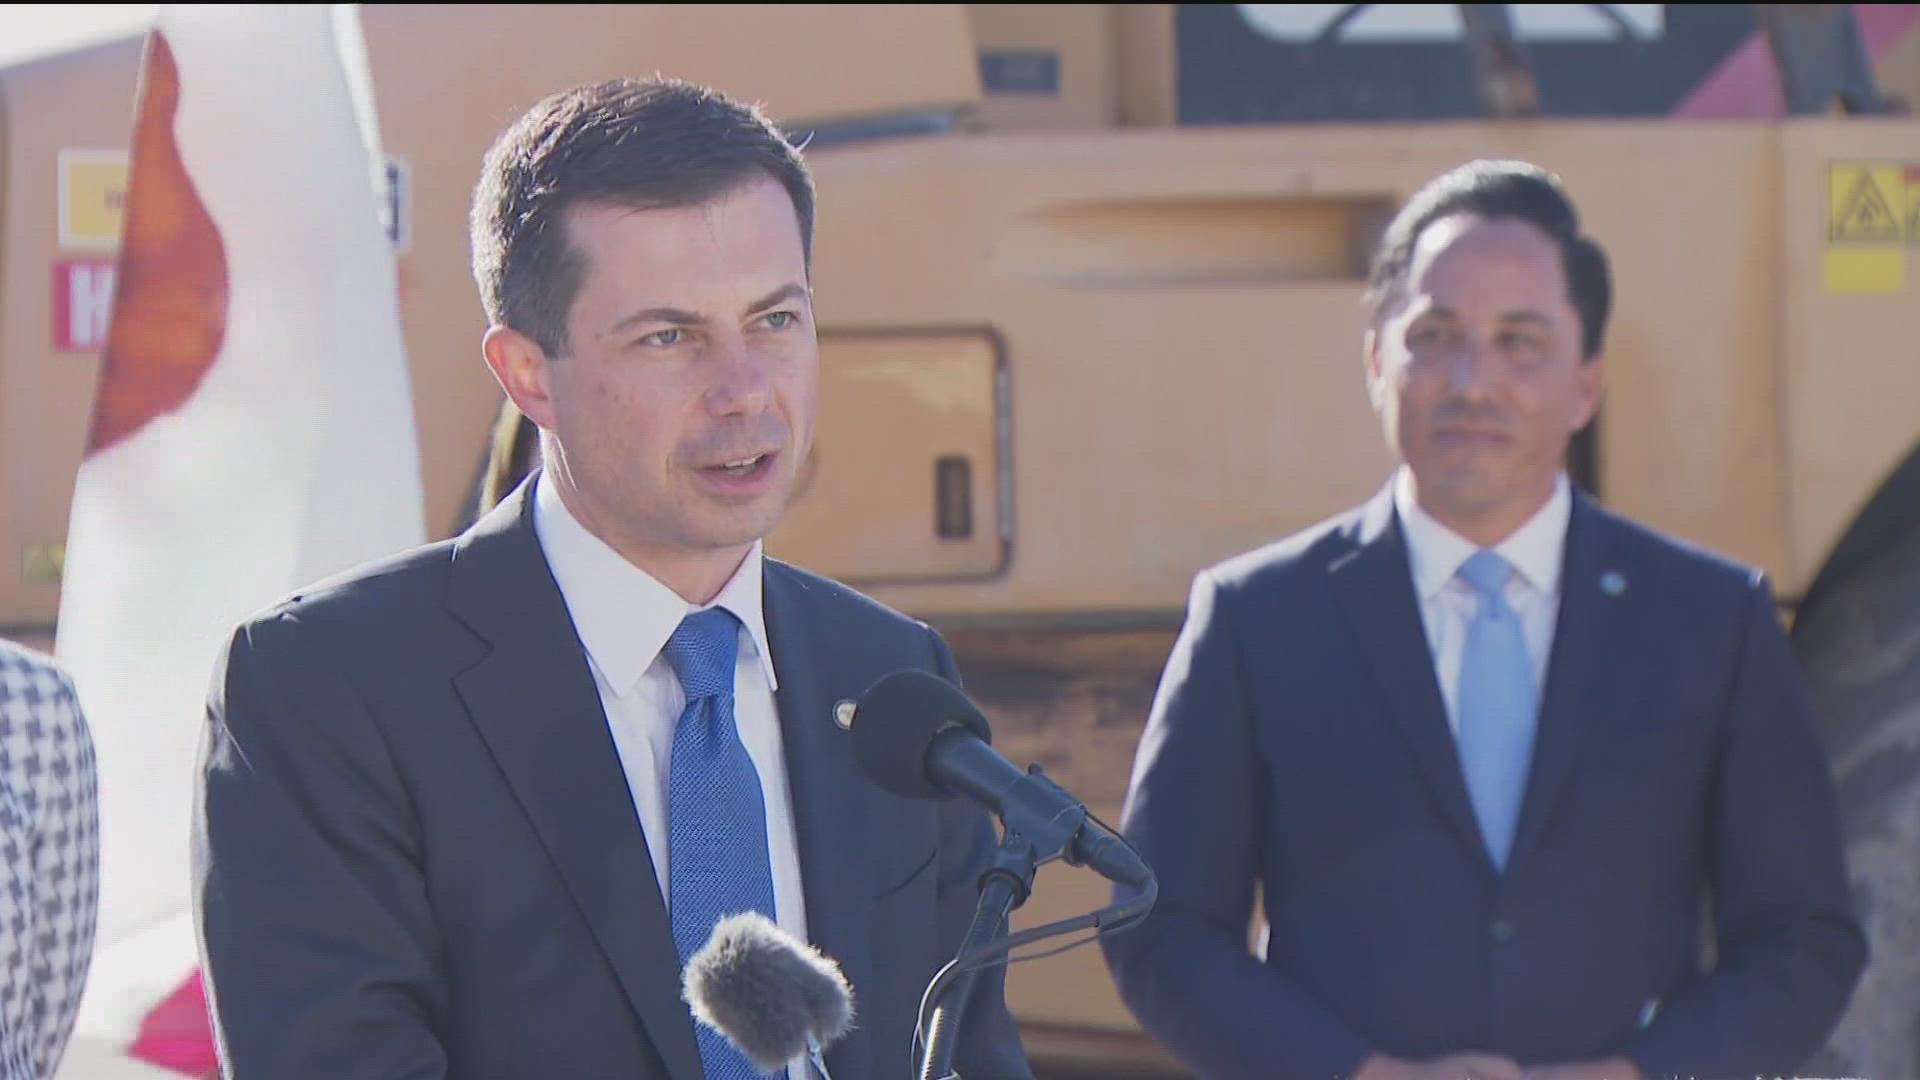 It's the U.S. transportation secretary's second visit to San Diego in just a matter of weeks.